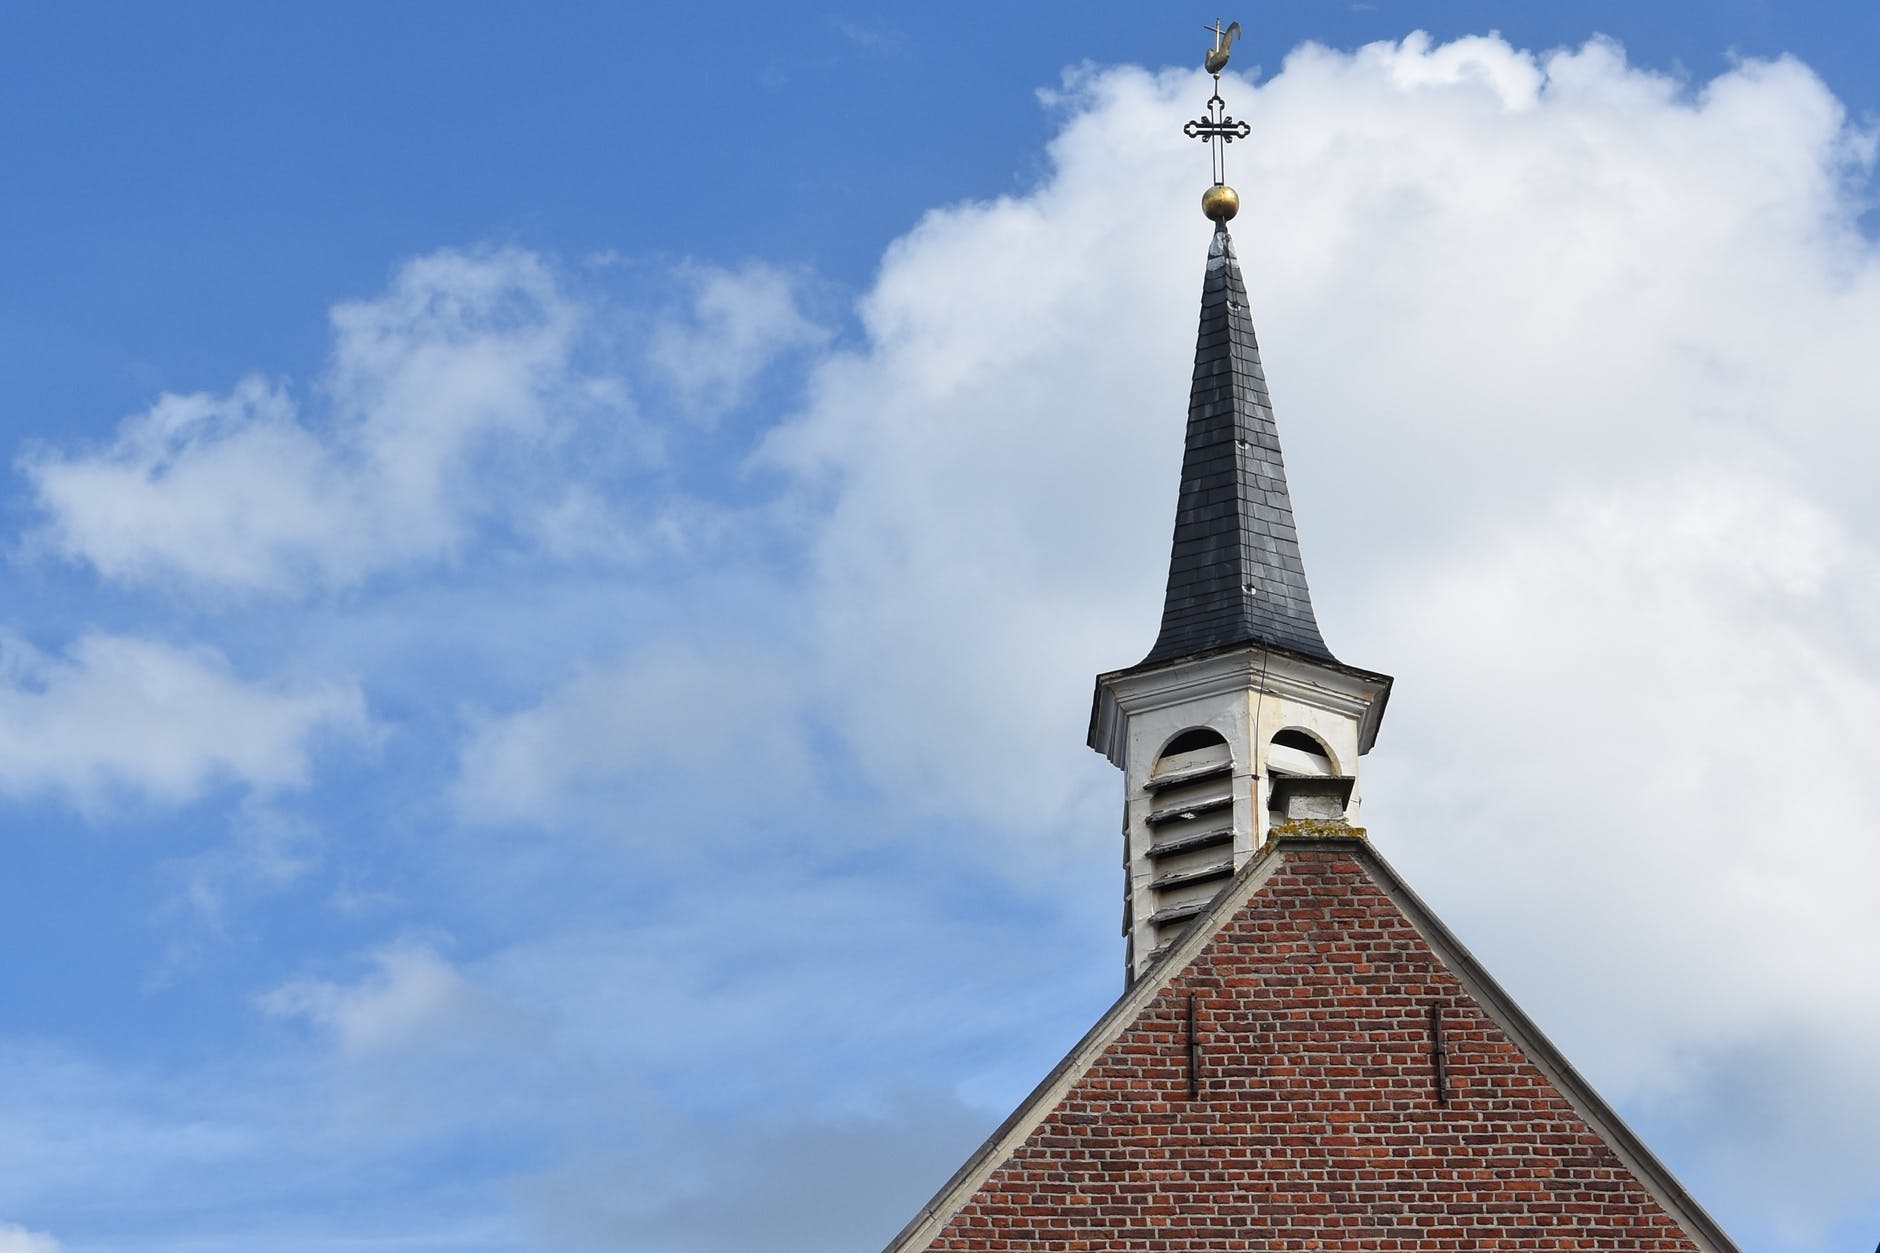 A steeple of the church.